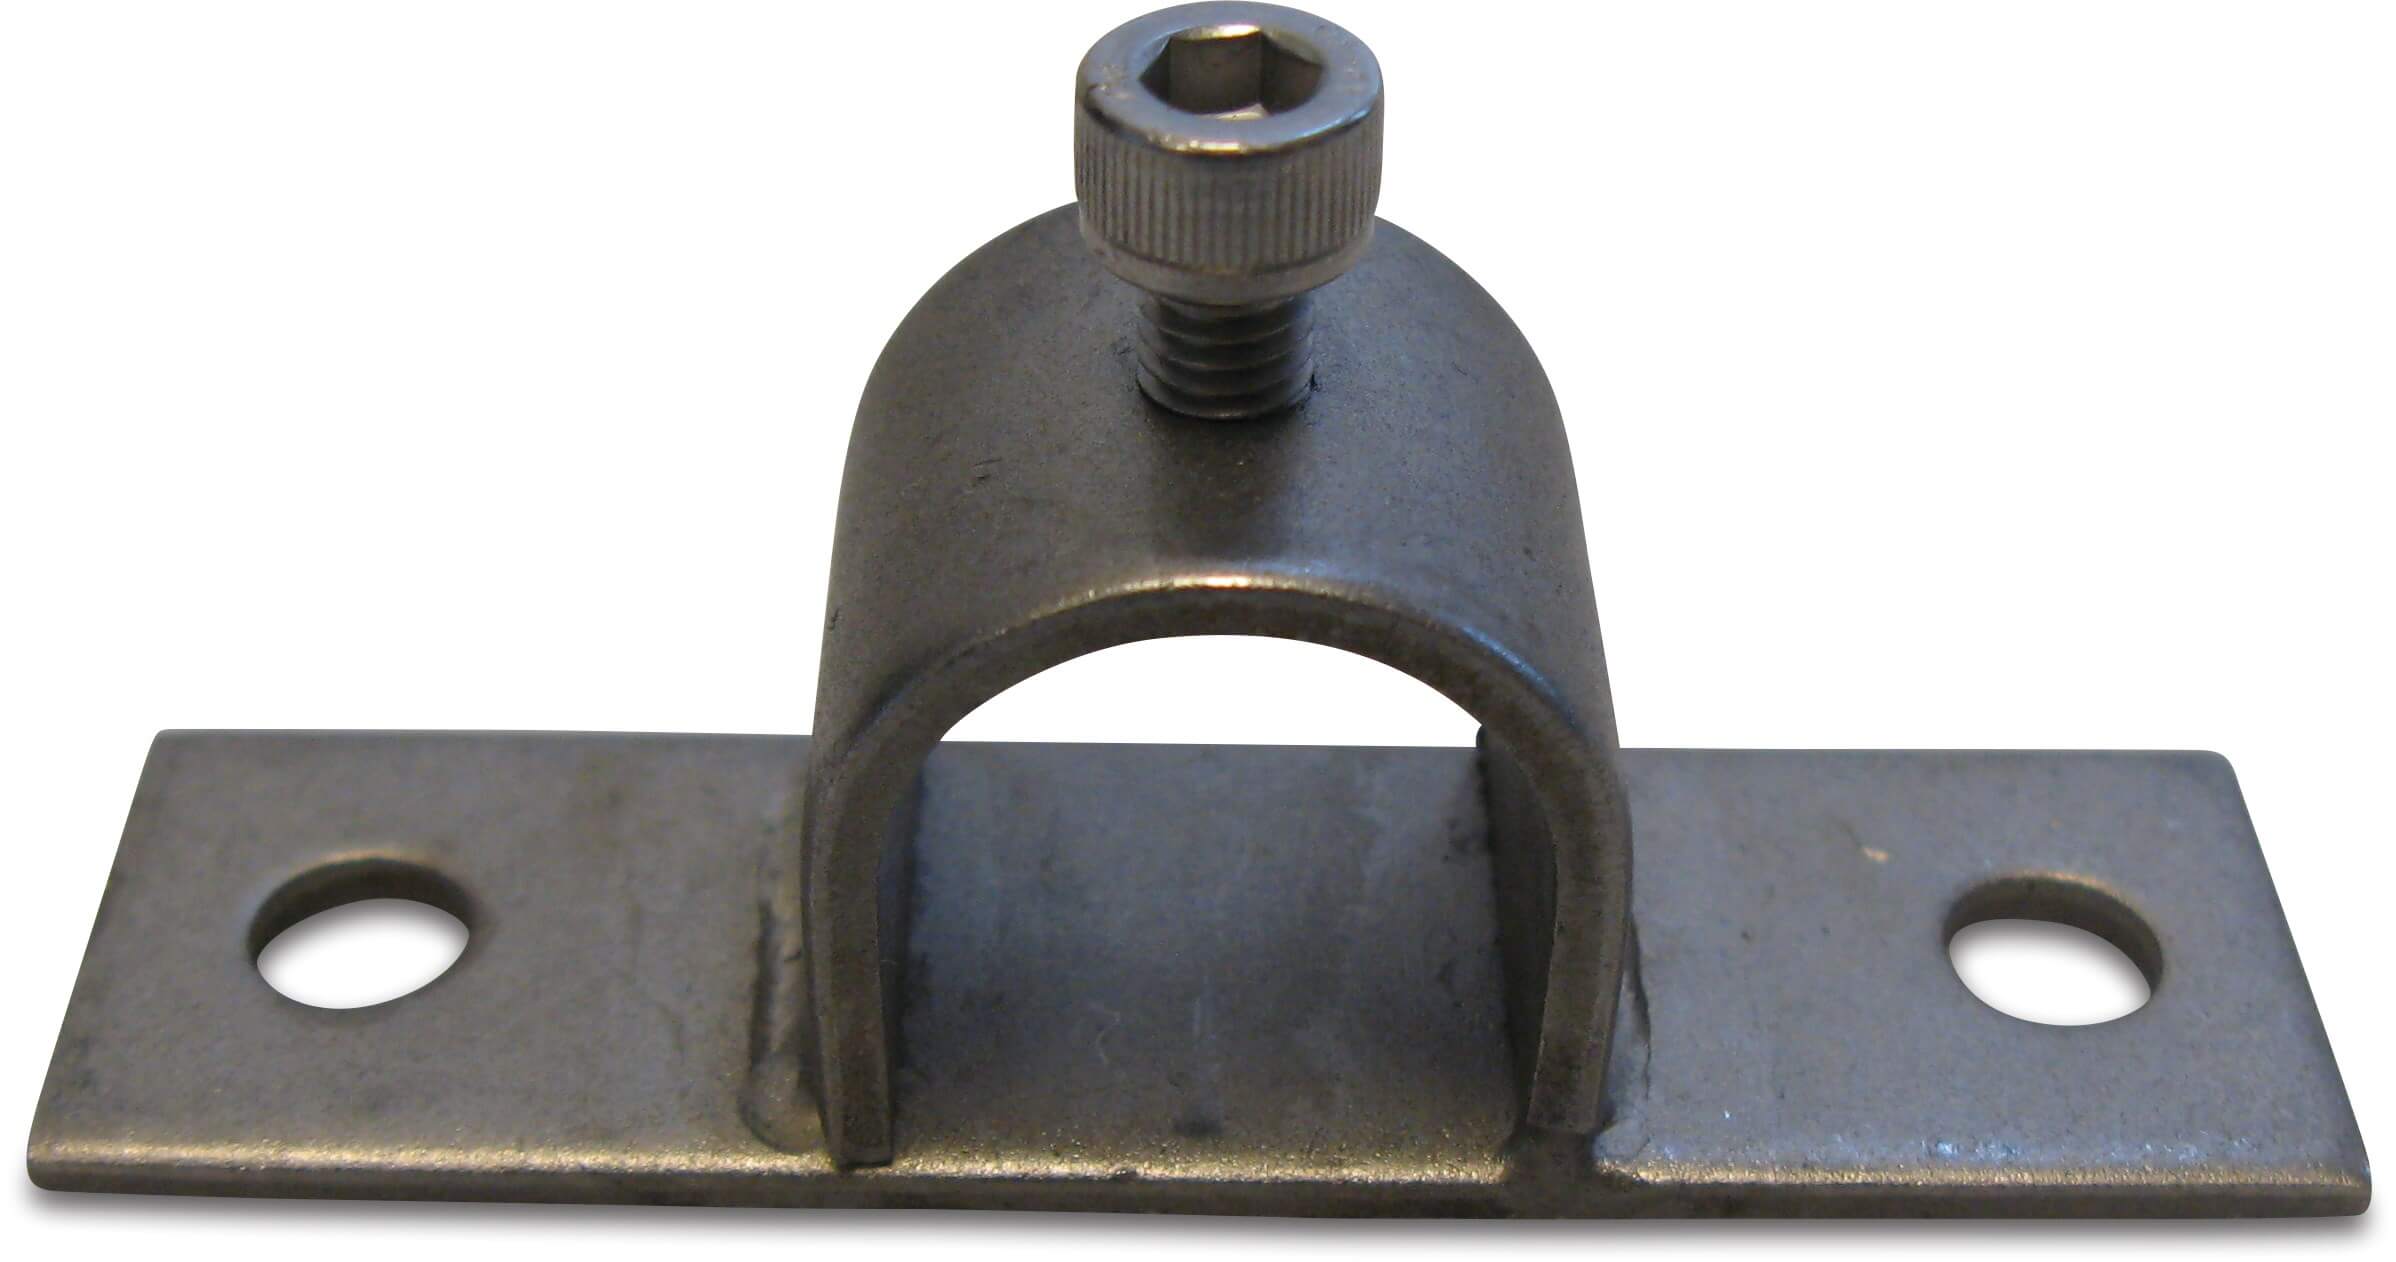 Adjustable clamp stainless steel 304 1/2"